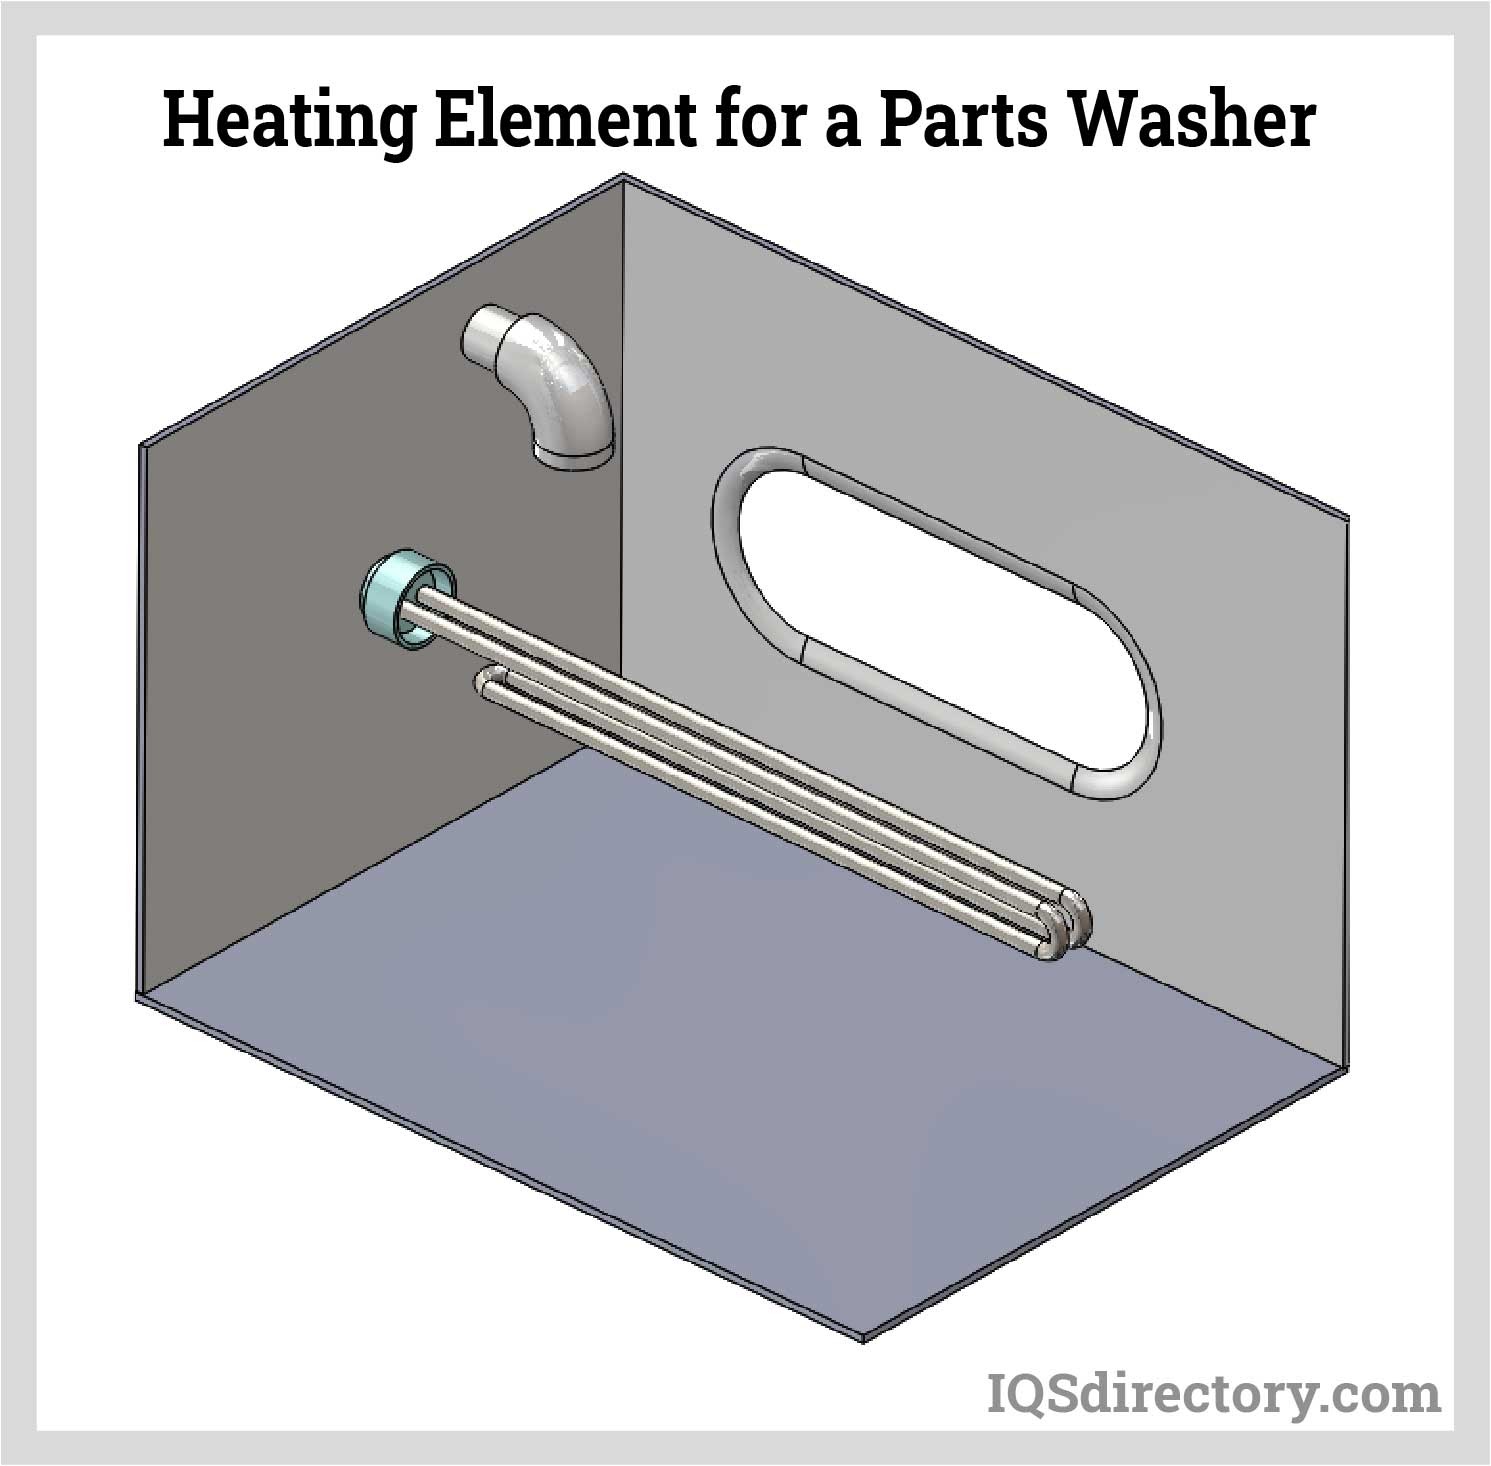 Heating Element for a Parts Washer